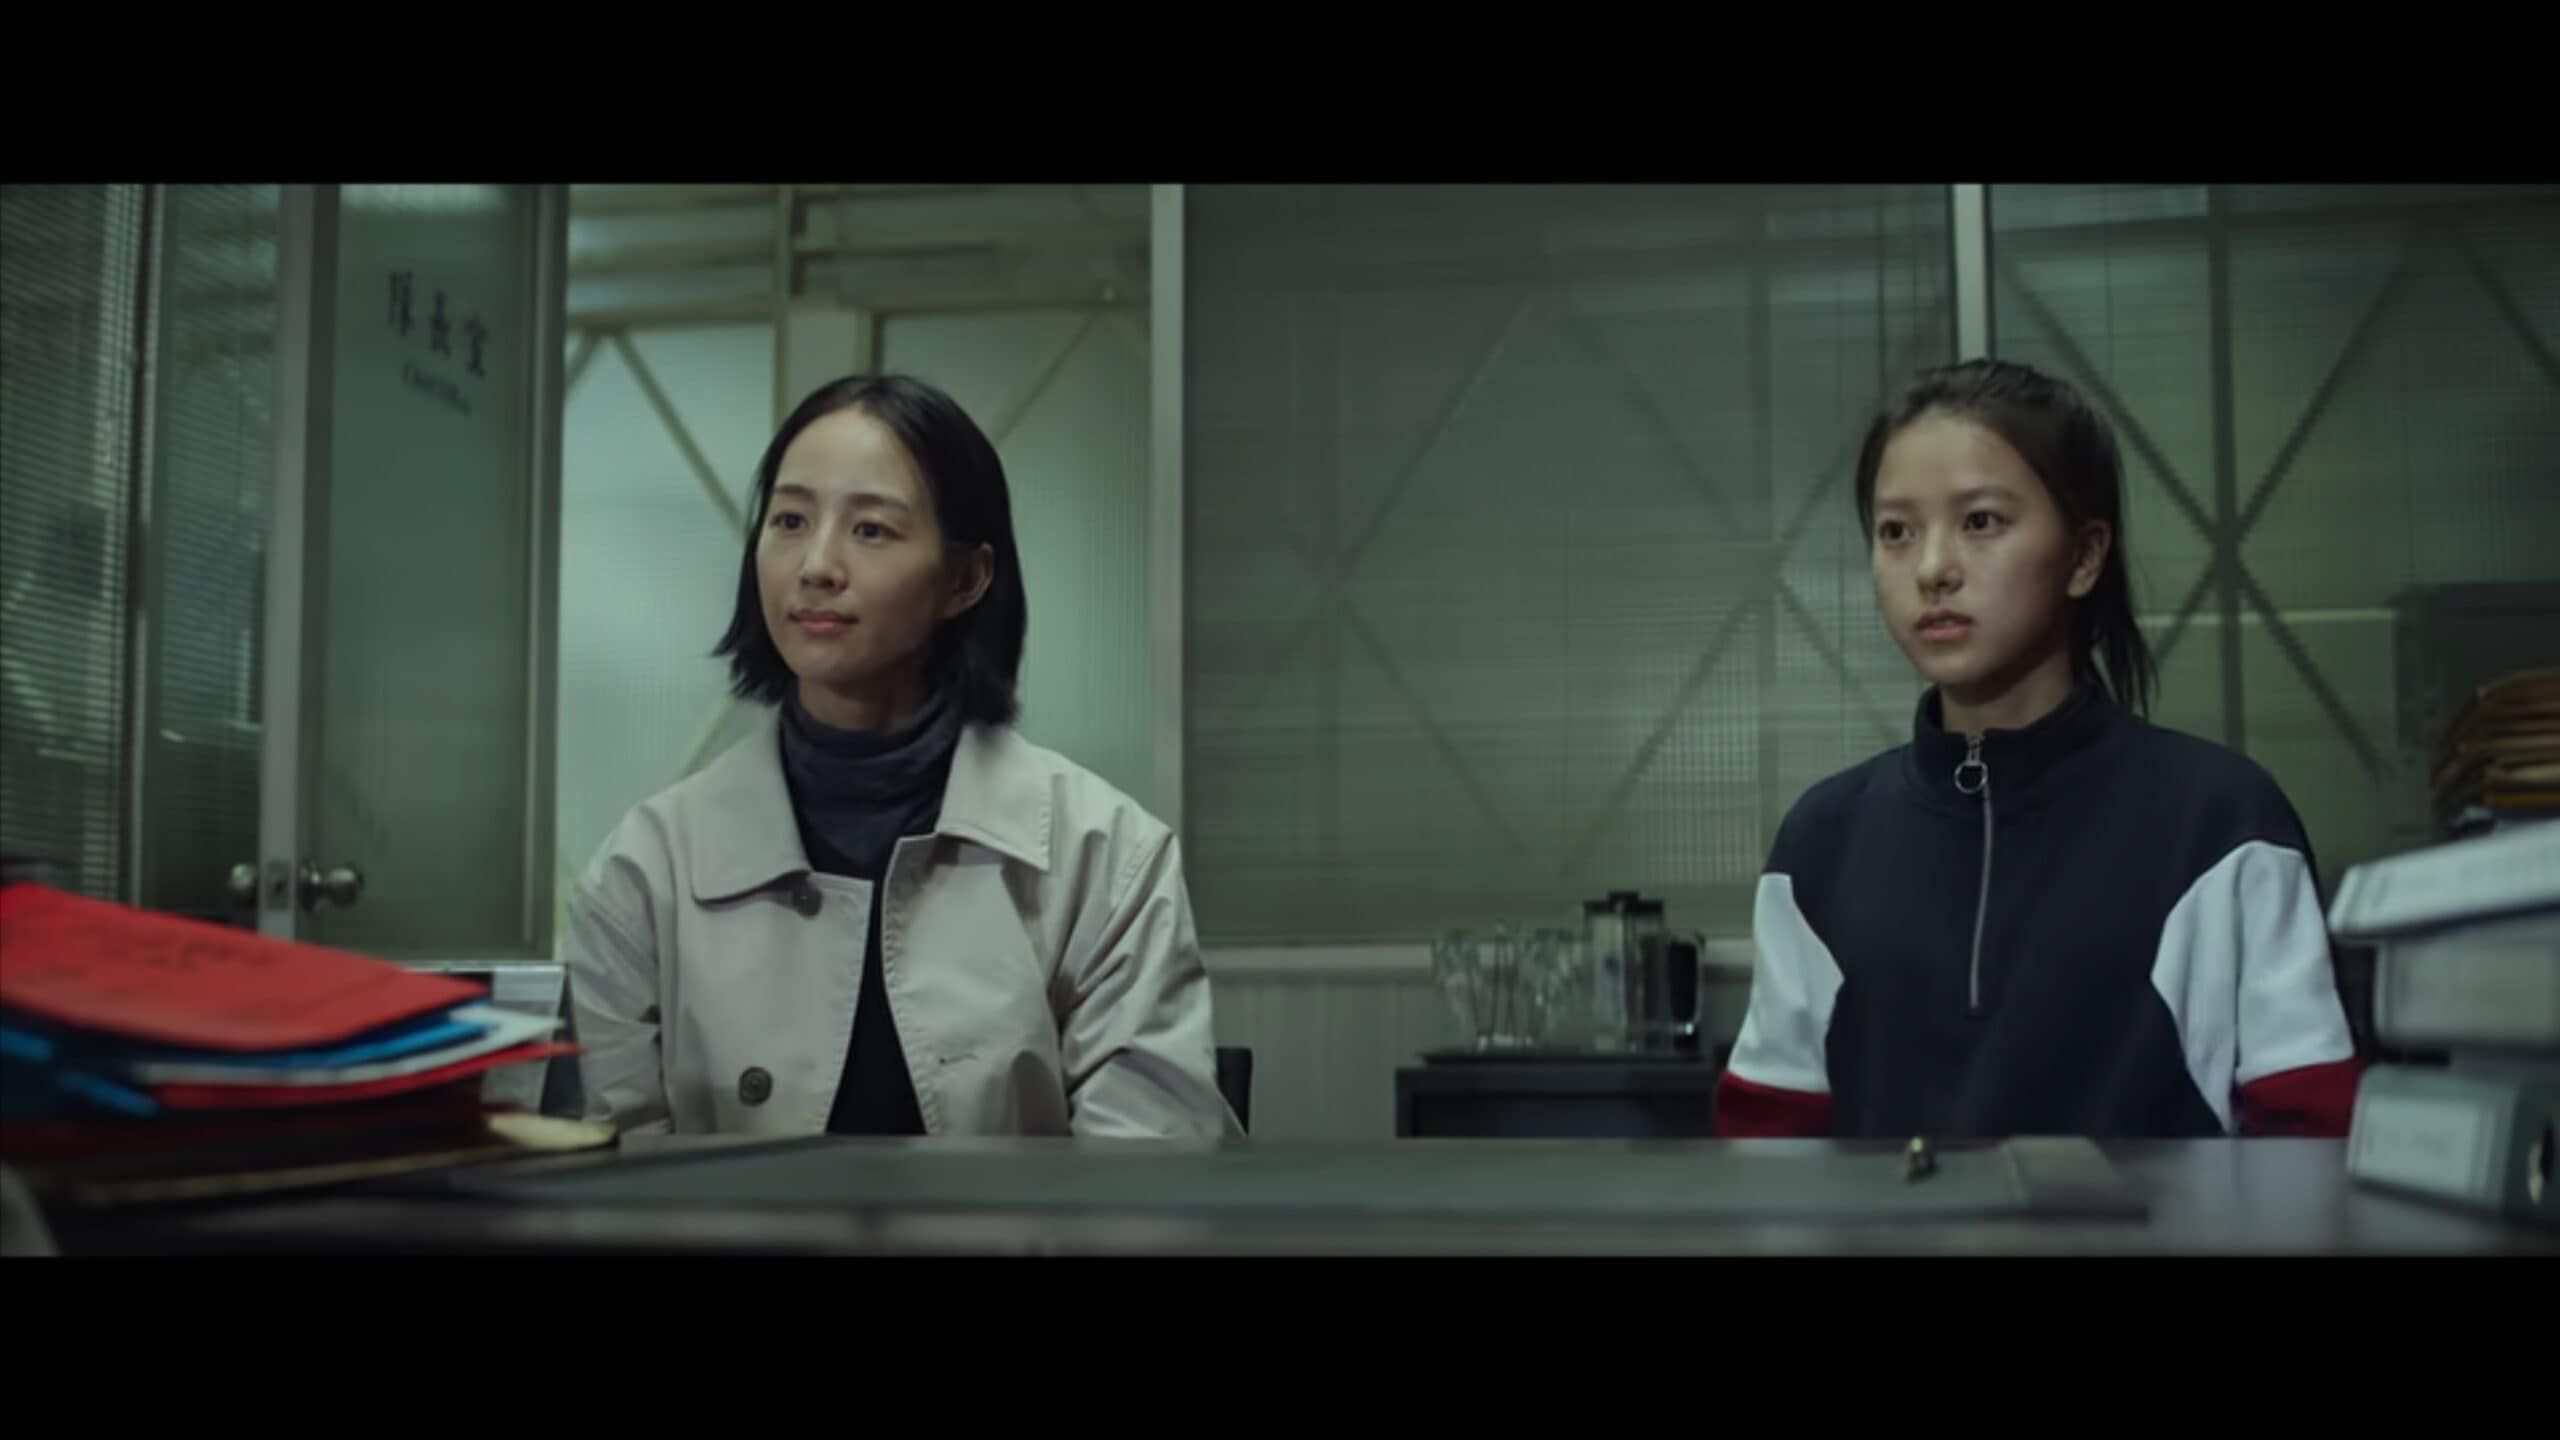 Deputy Captain Wu Chieh (Janine Chang) and Wei-shan (Chloe Xiang) as they learn they will be working together on the missing migrant case